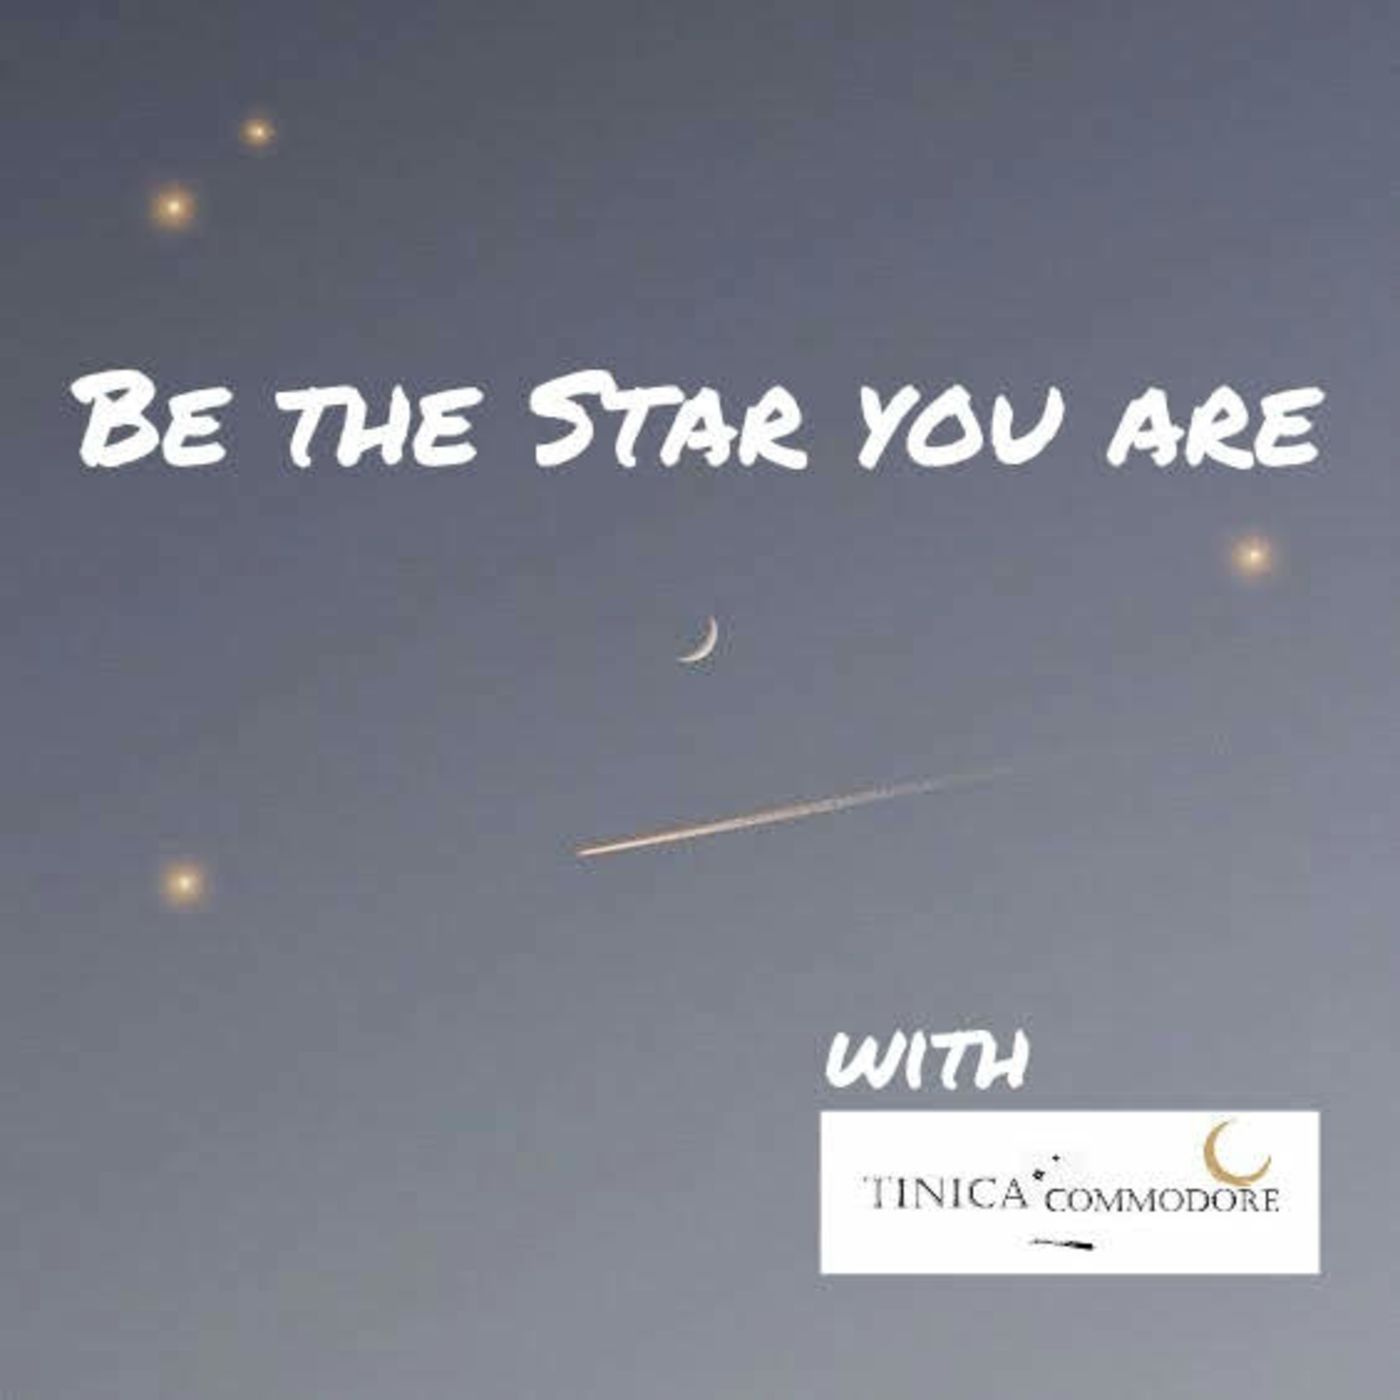 Be the star you are